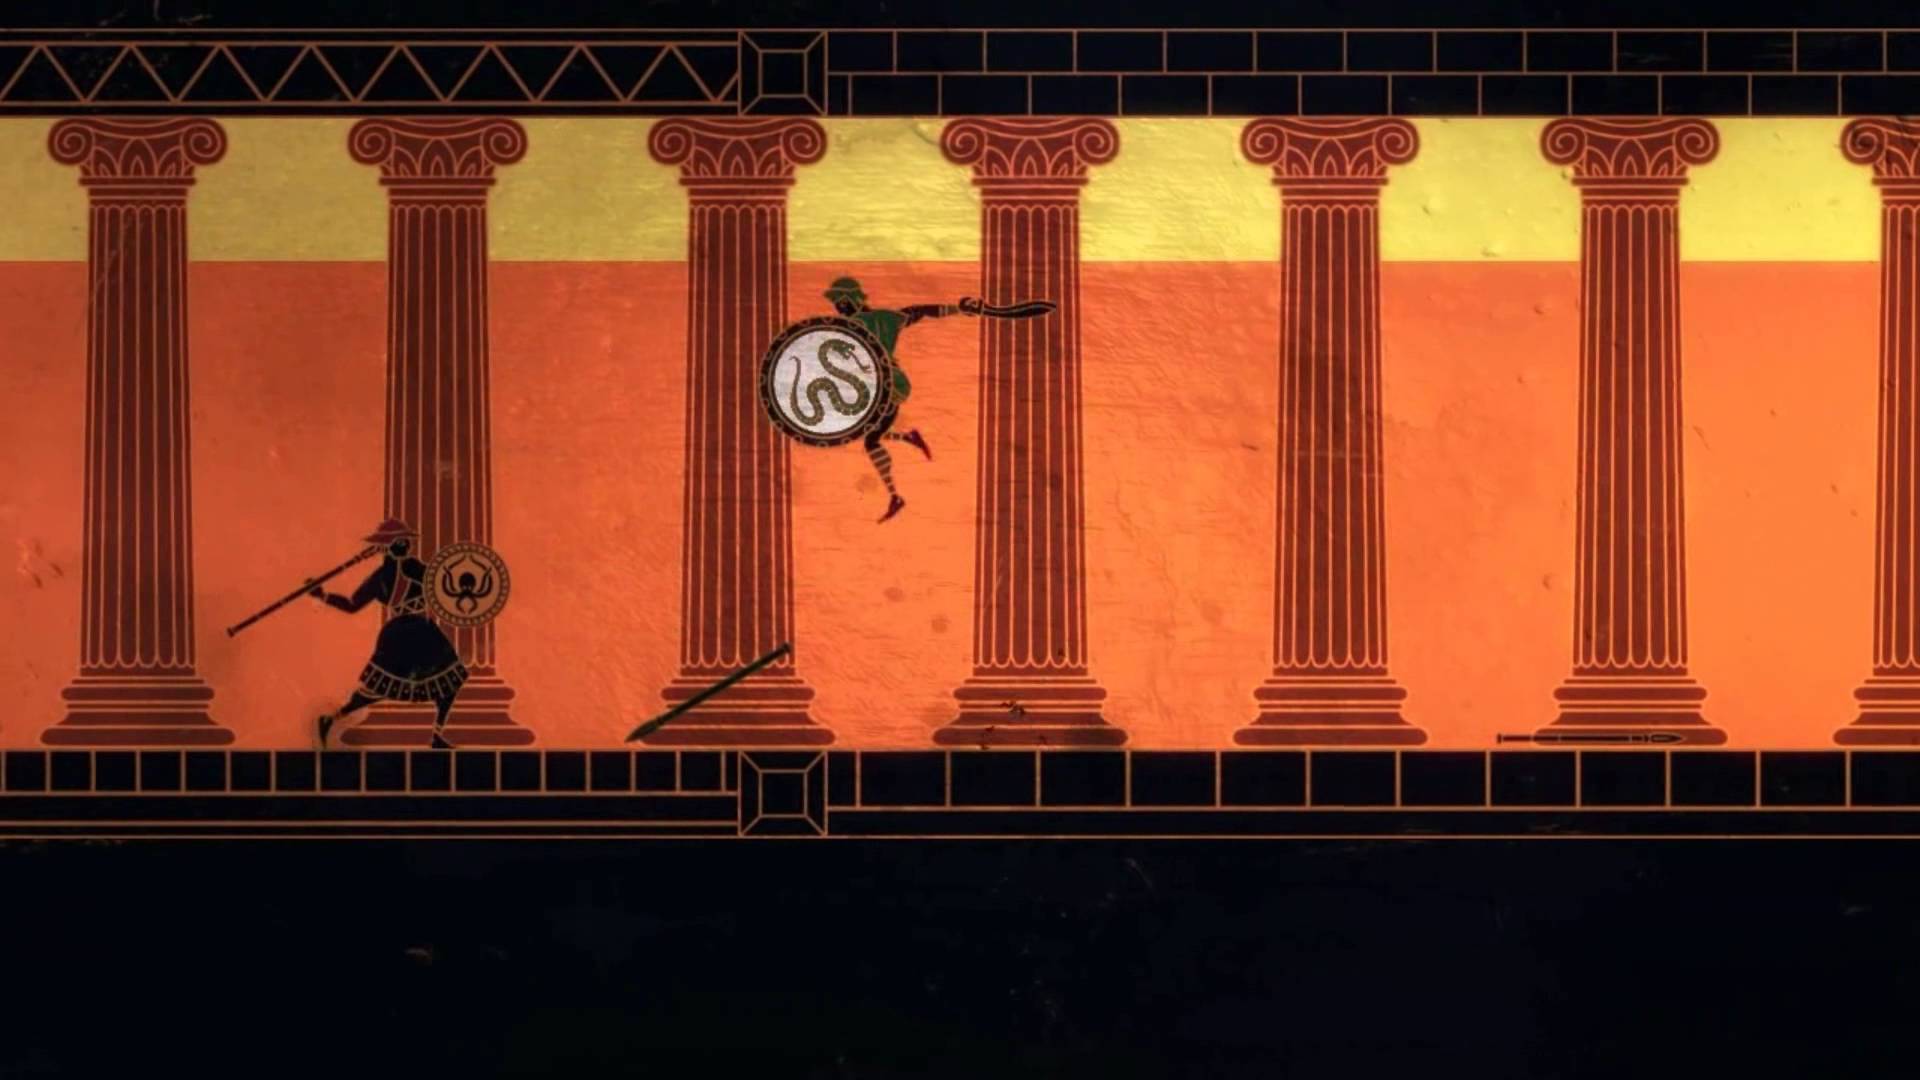 Wallpapers from Apotheon | gamepressure.com